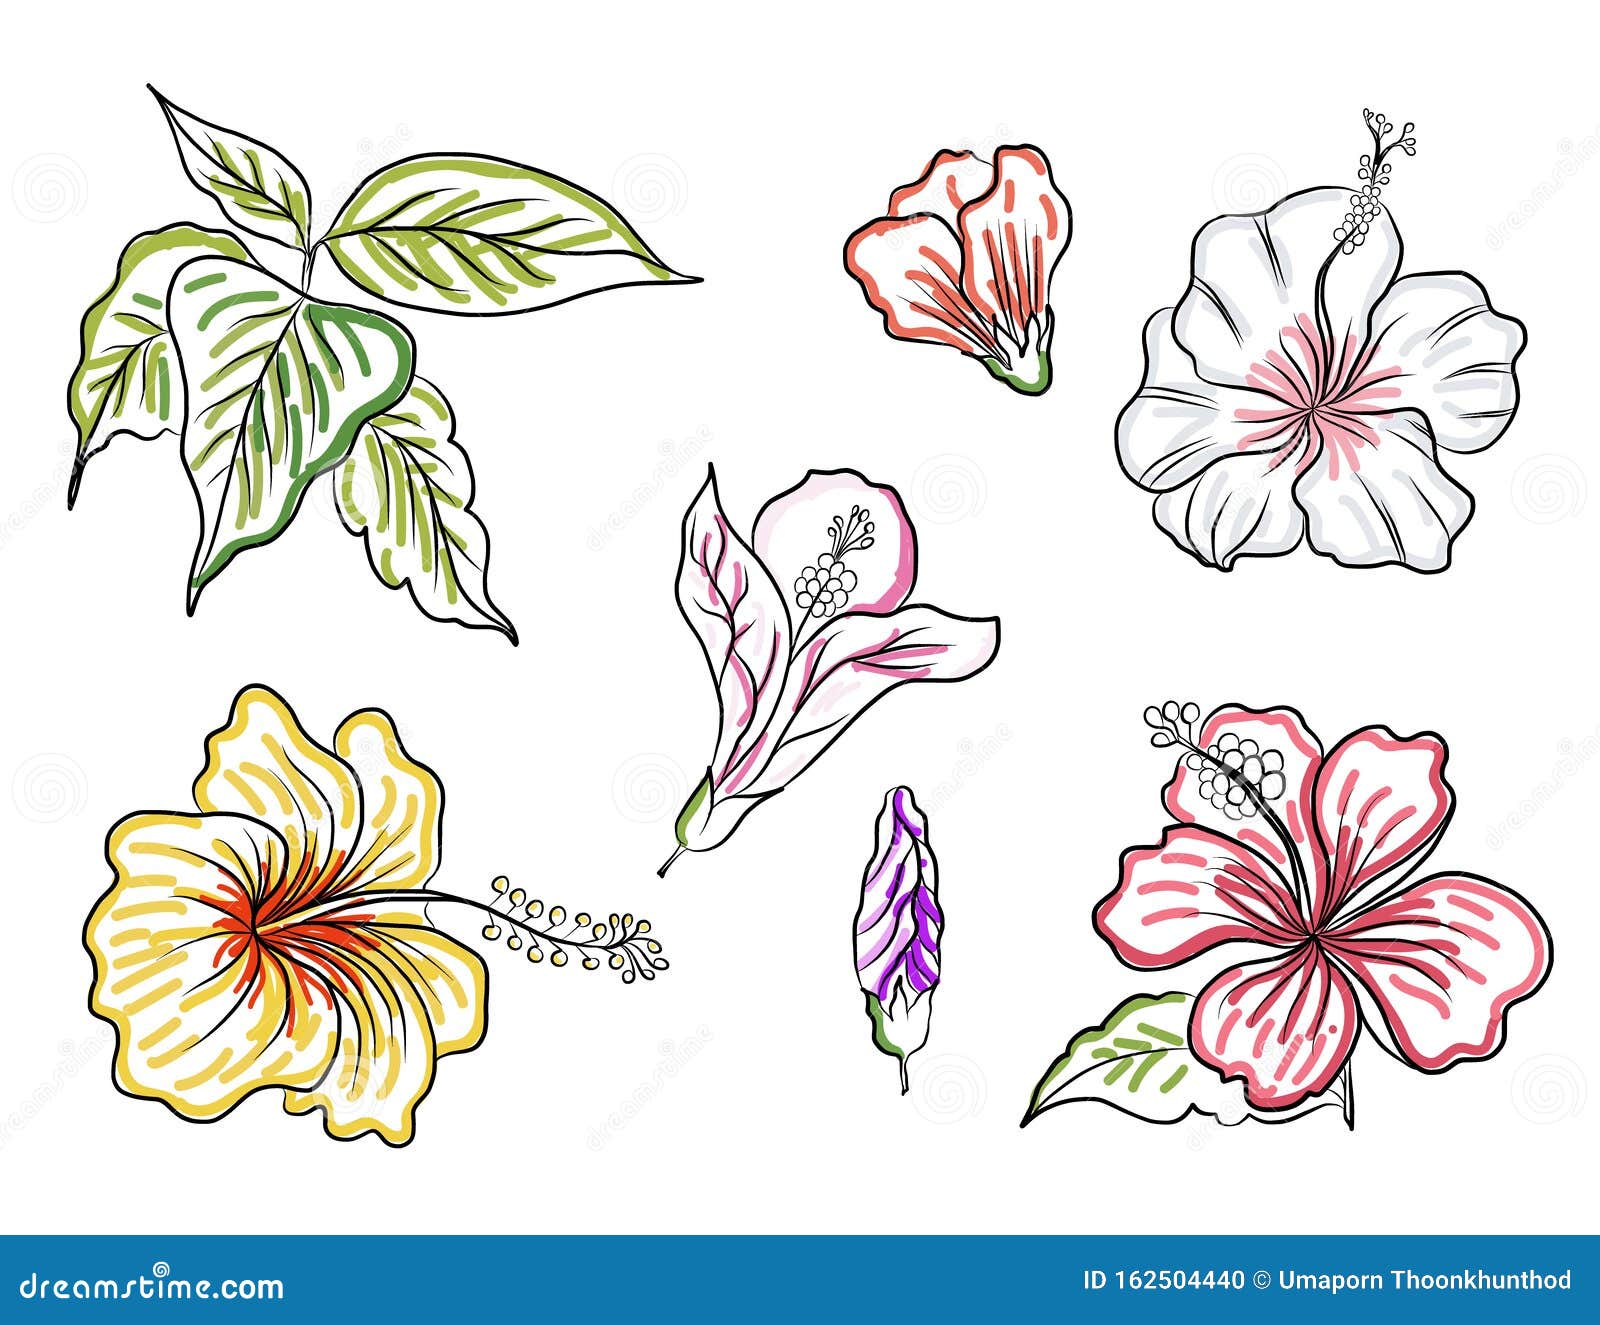 Hibiscus Flower Vector Set for Tattoo Design or Printing on Jacket on ...